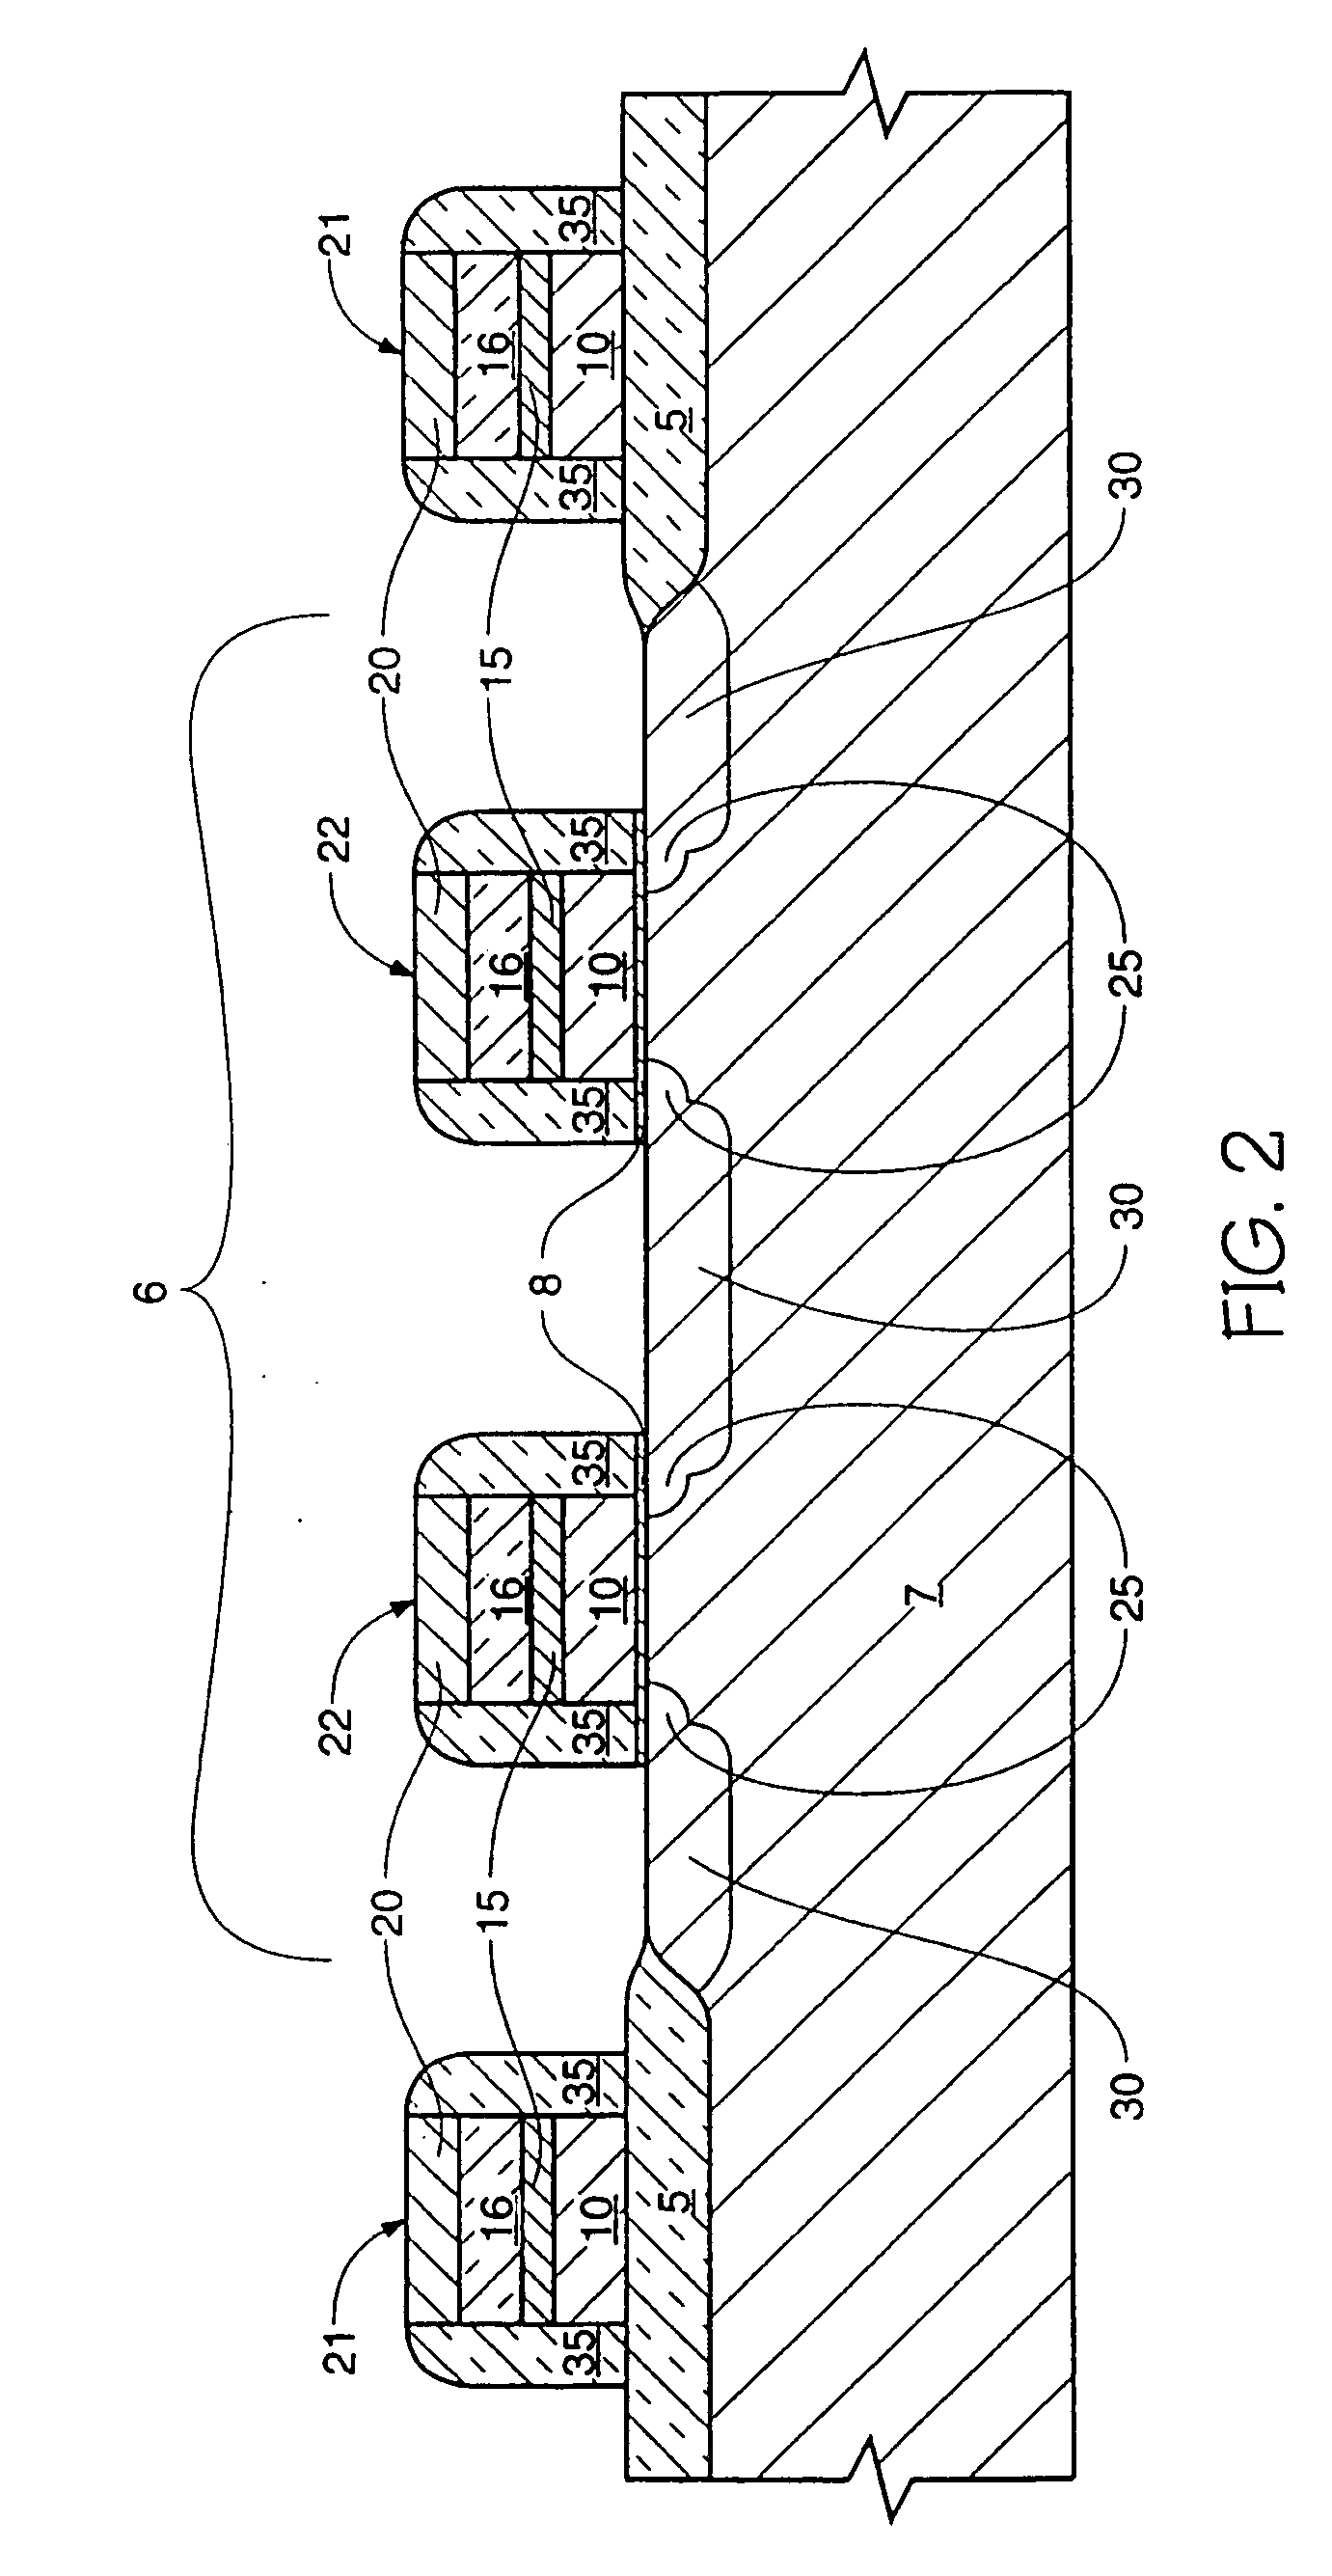 Method for forming a storage cell capacitor compatible with high dielectric constant materials